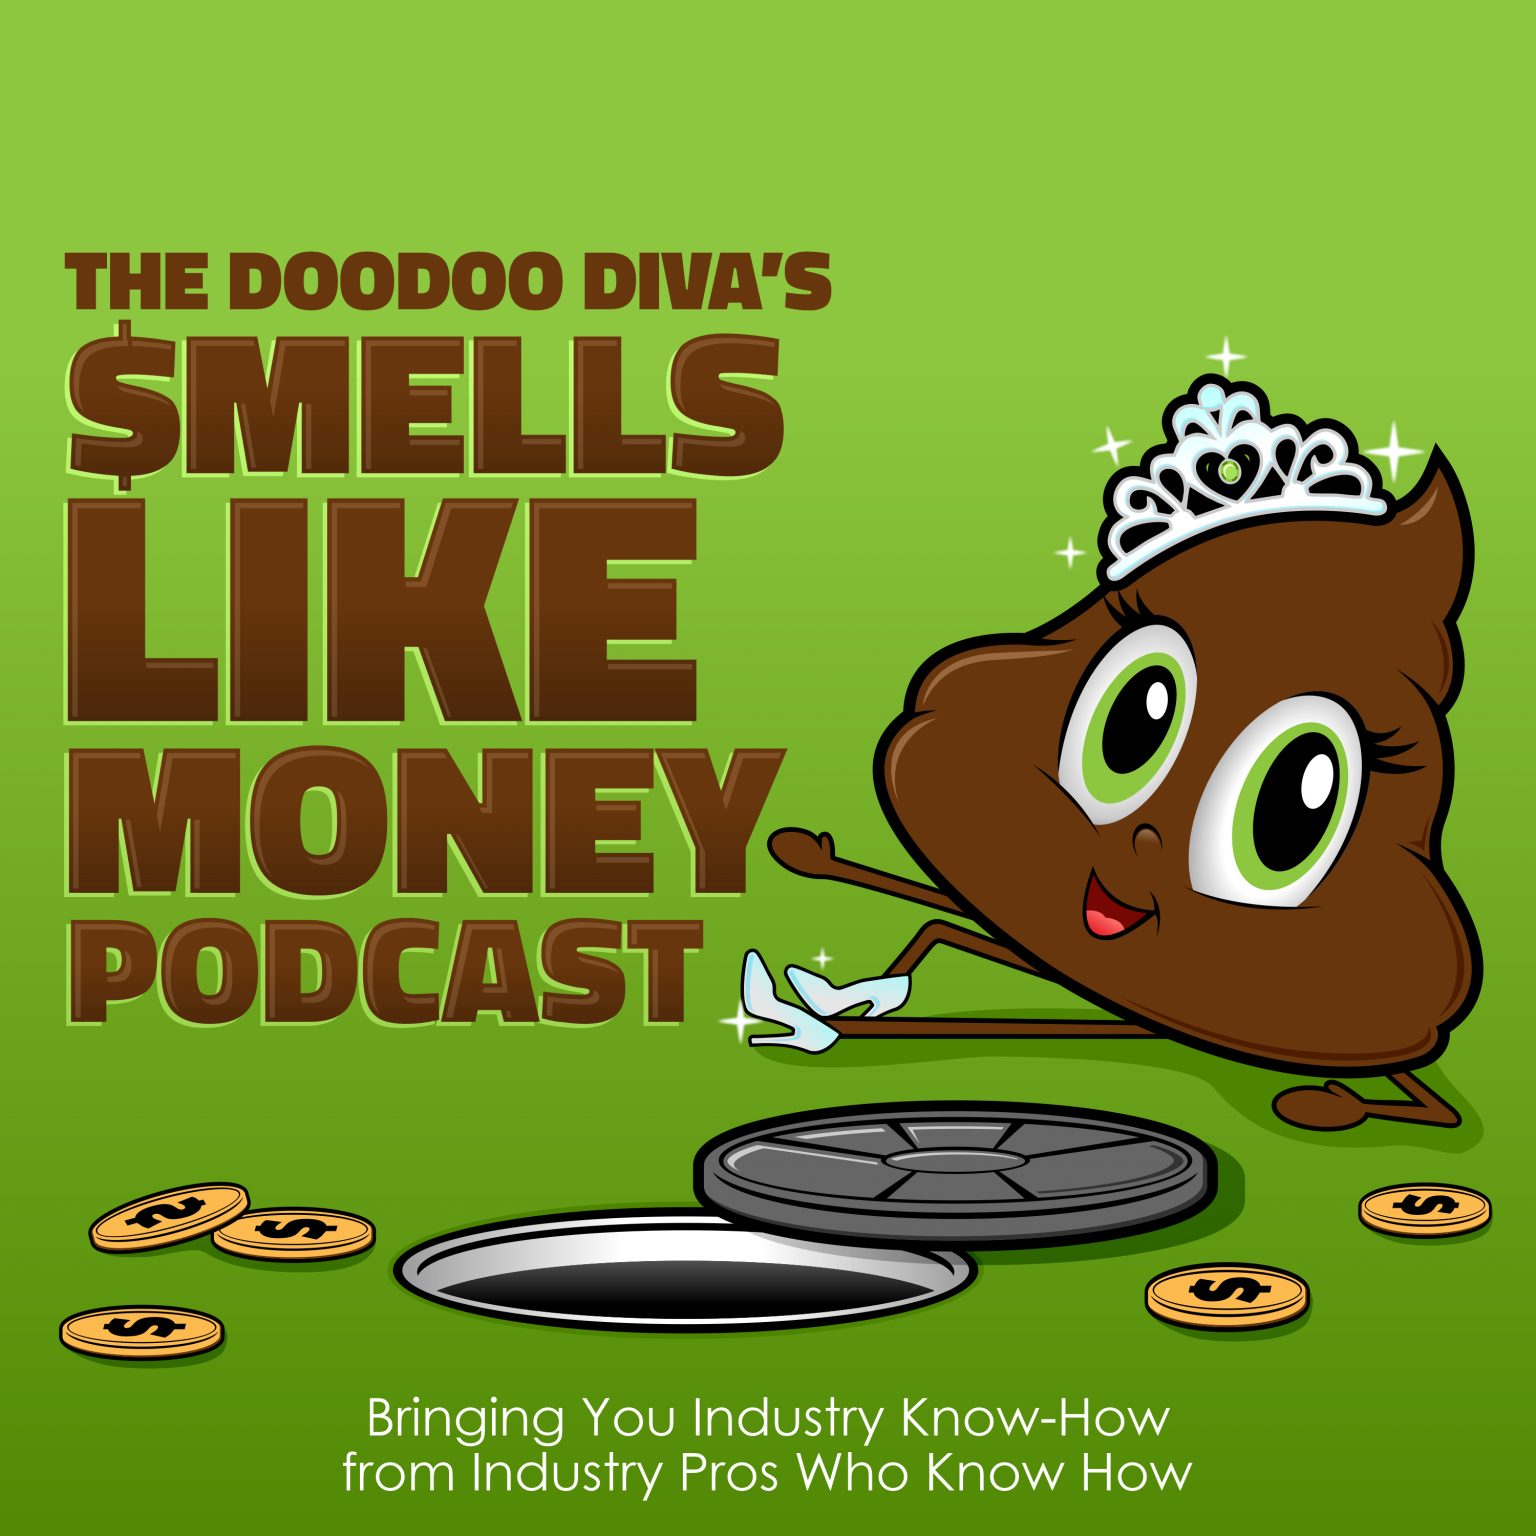 SediVision Founder, Denver Stutler, Featured on Podcast with DooDoo Diva